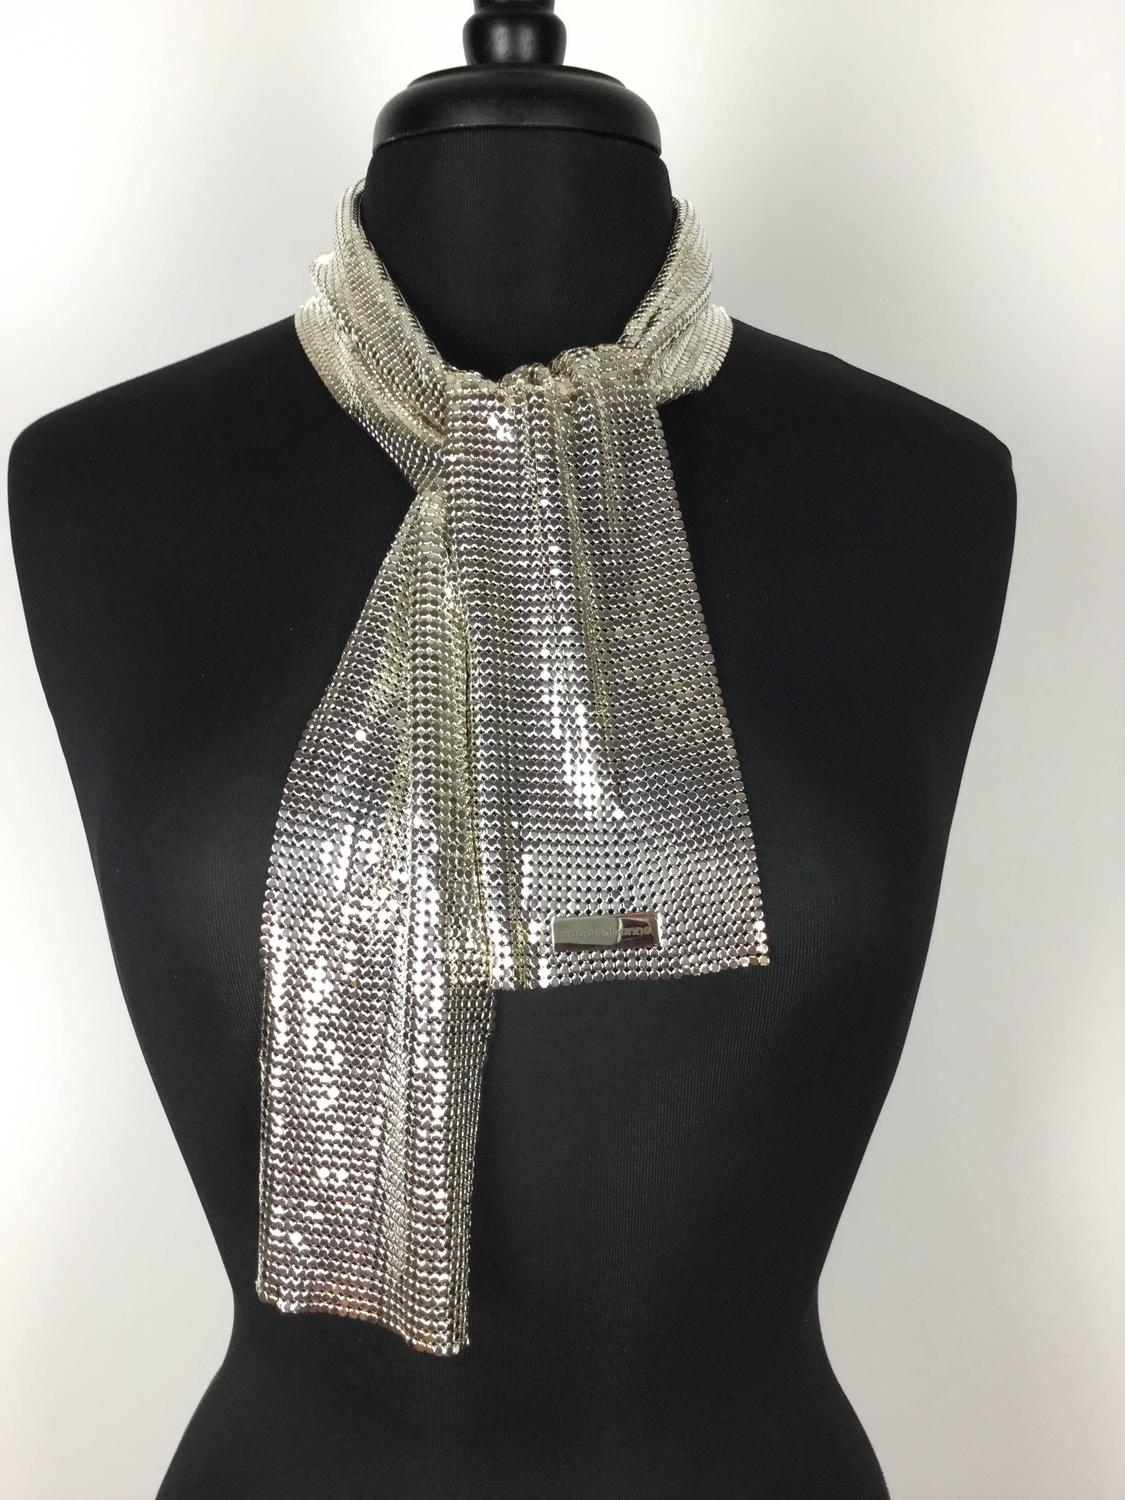 Space Age Style Paco Rabanne Chainmail Metal Scarf. at 1stdibs